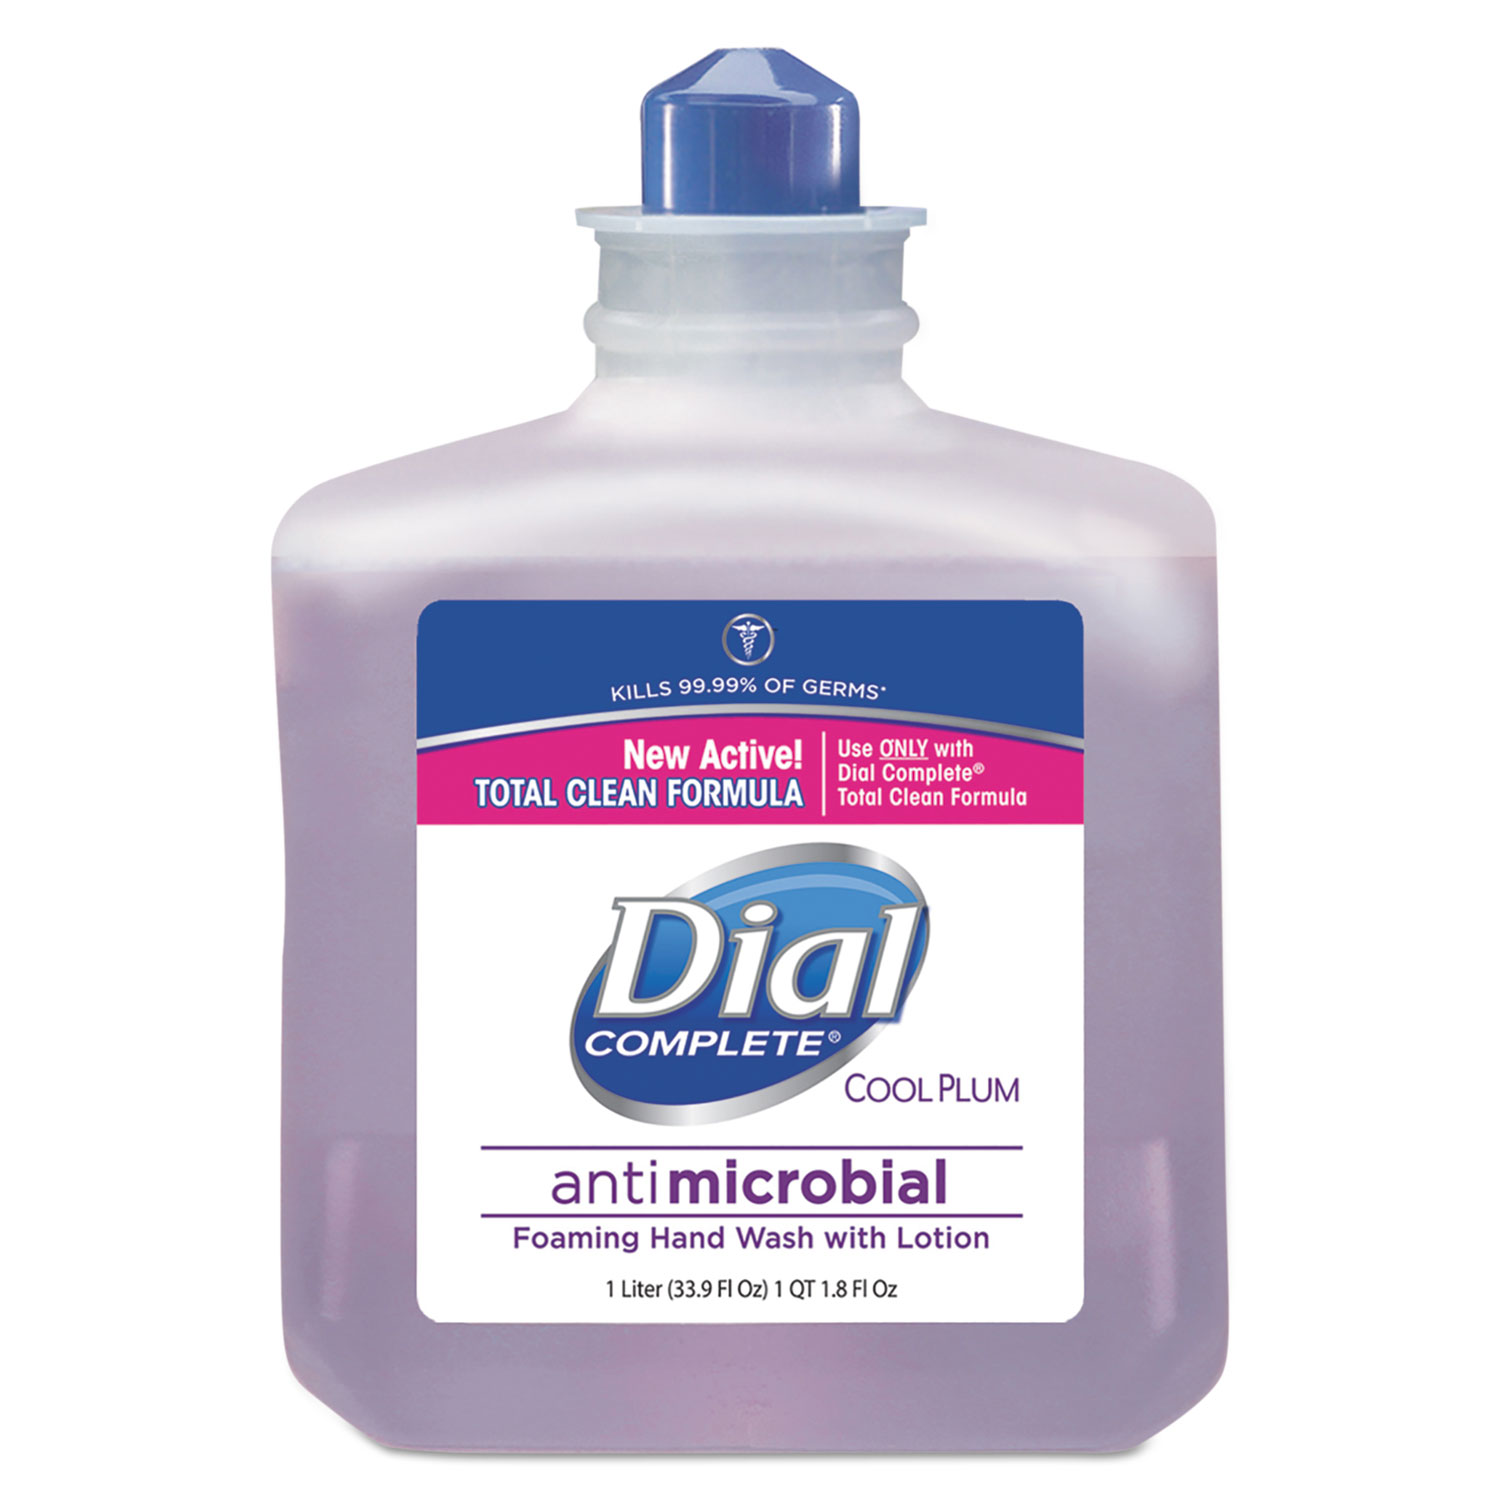  Dial Professional 2340081033 Antimicrobial Foaming Hand Wash, Cool Plum Scent, 1000mL Bottle (DIA81033) 